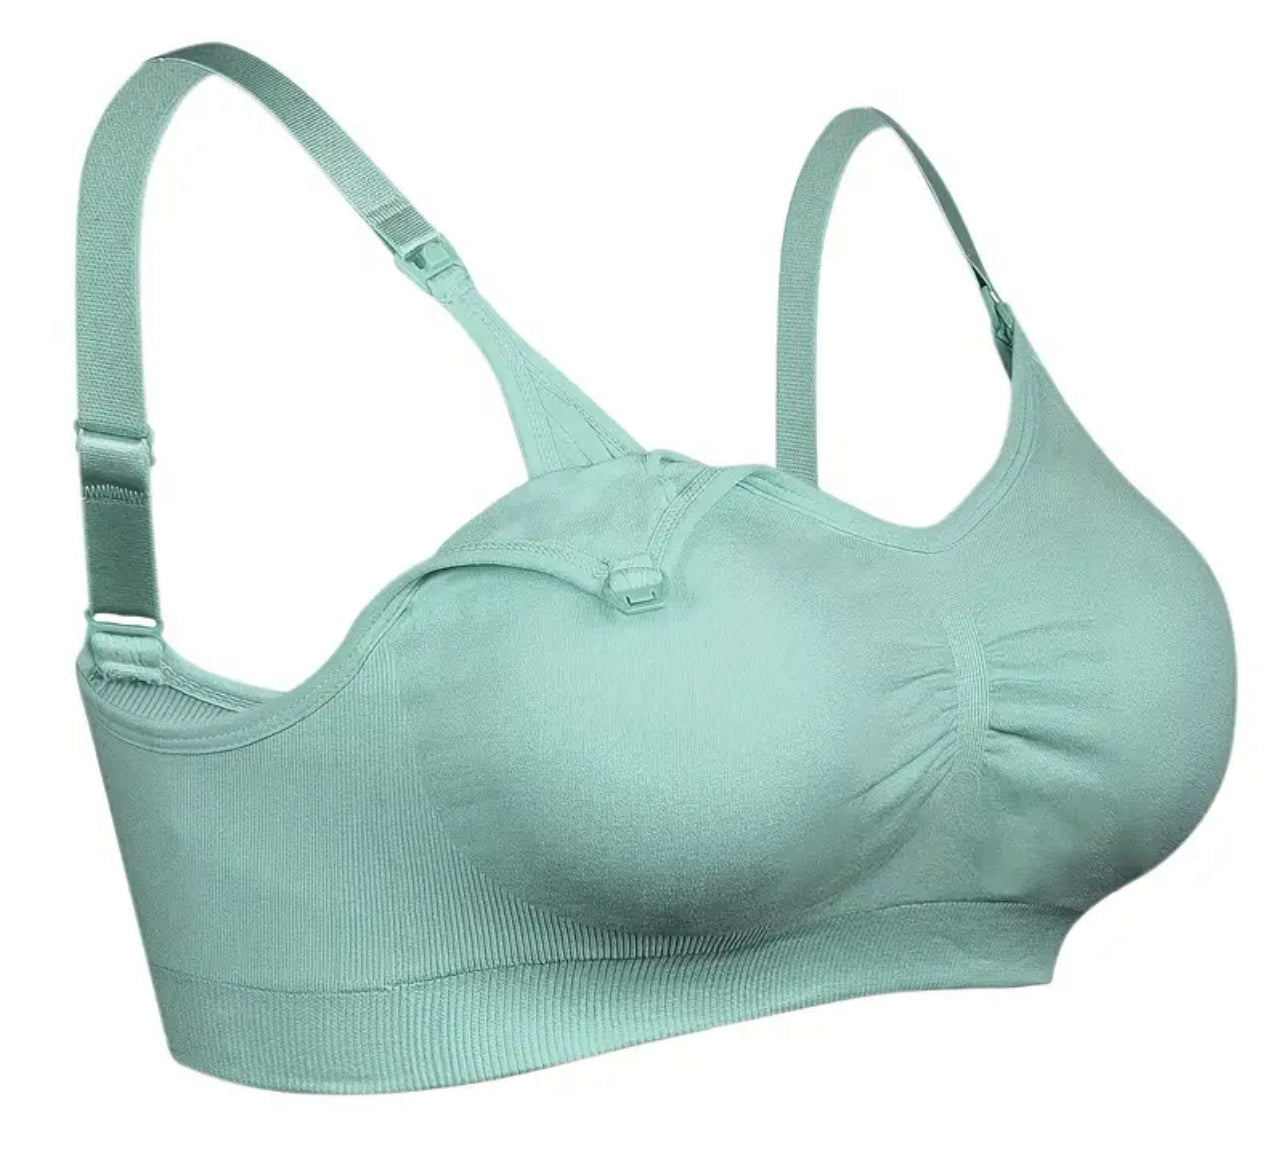 Women's Maternity Hands Pumping Push Up Bra, Baby Bumps 🌙🌟 Collection